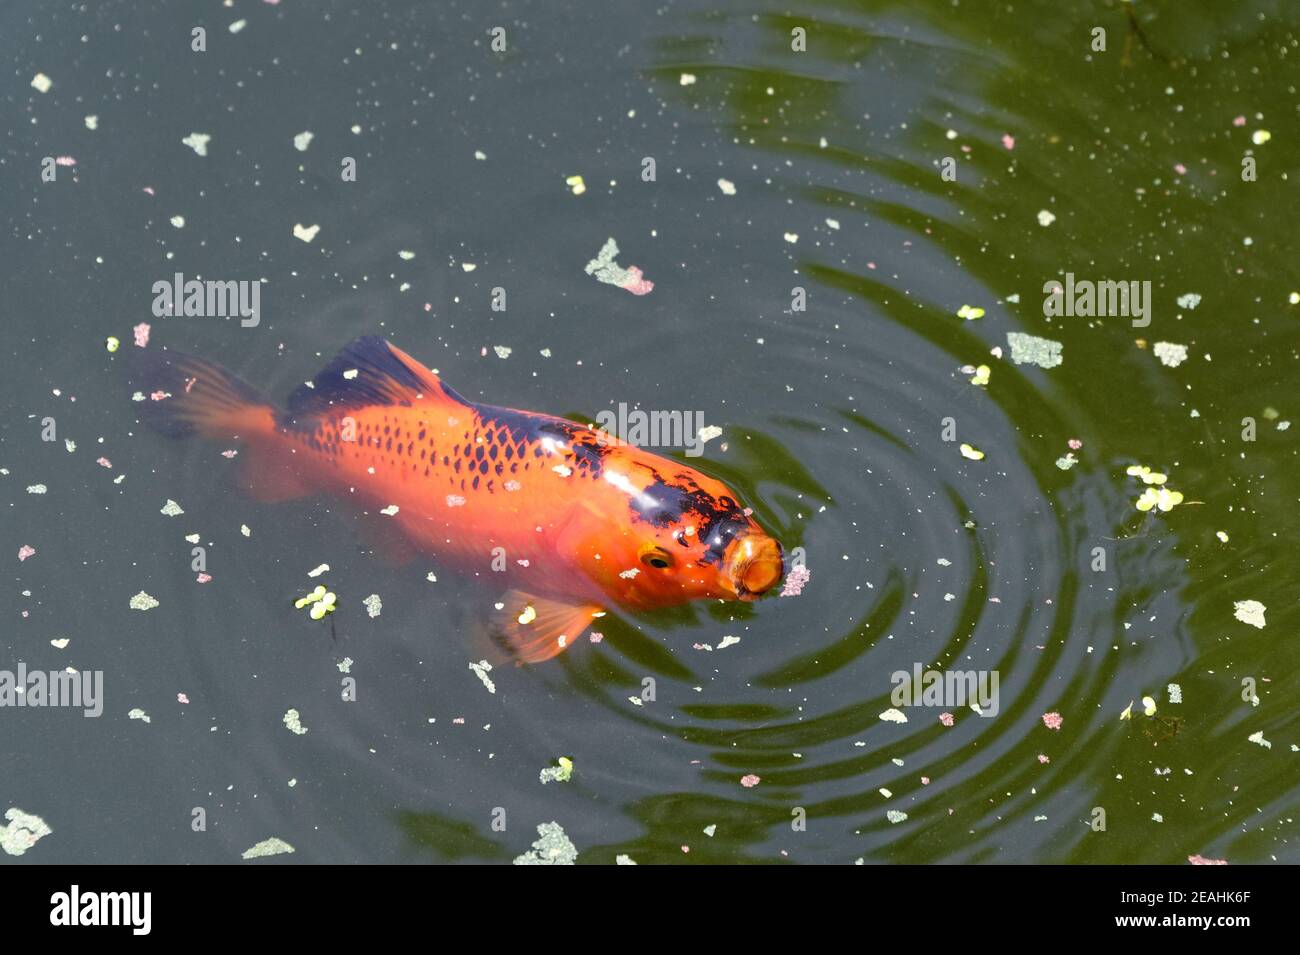 It's dinner time in the pond with a black and gold goldfish at the surface with its mouth open, sucking in food Stock Photo